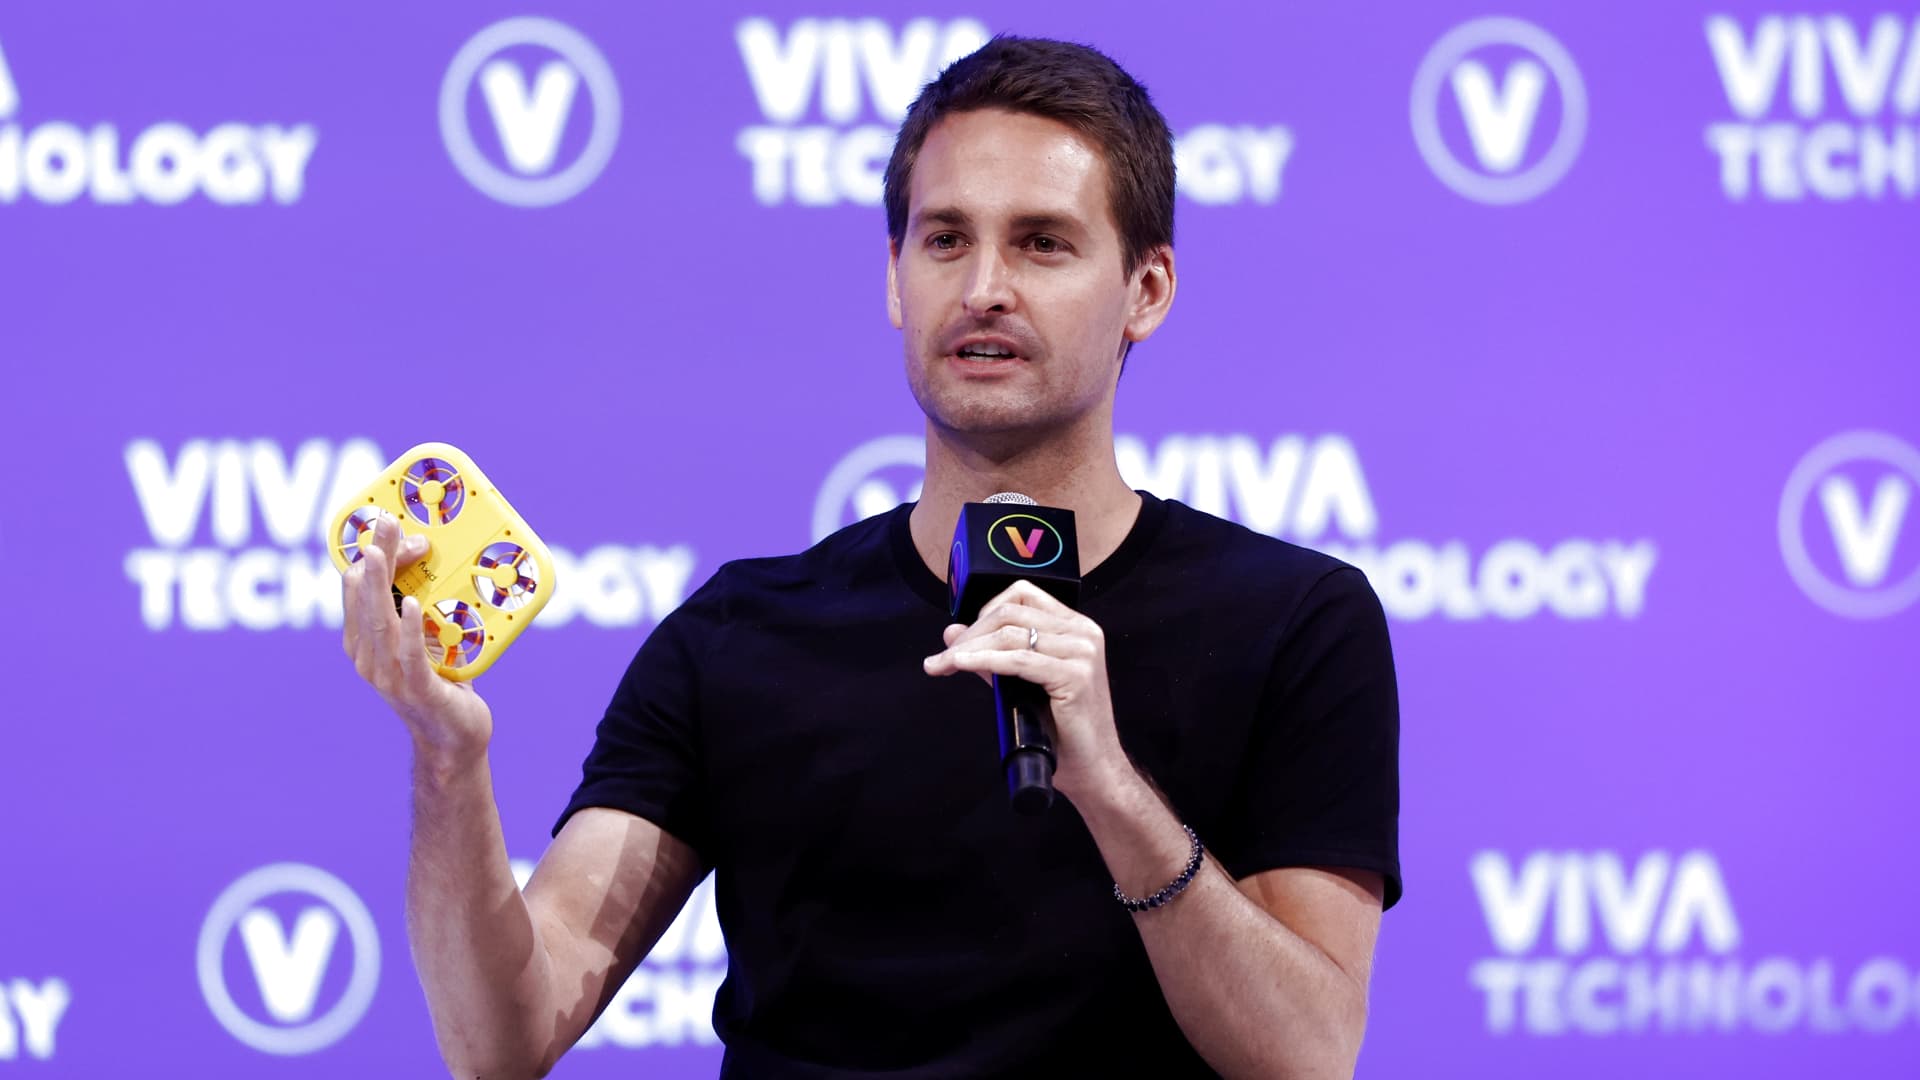 Snap shares plunge more than 17% on weak forecast